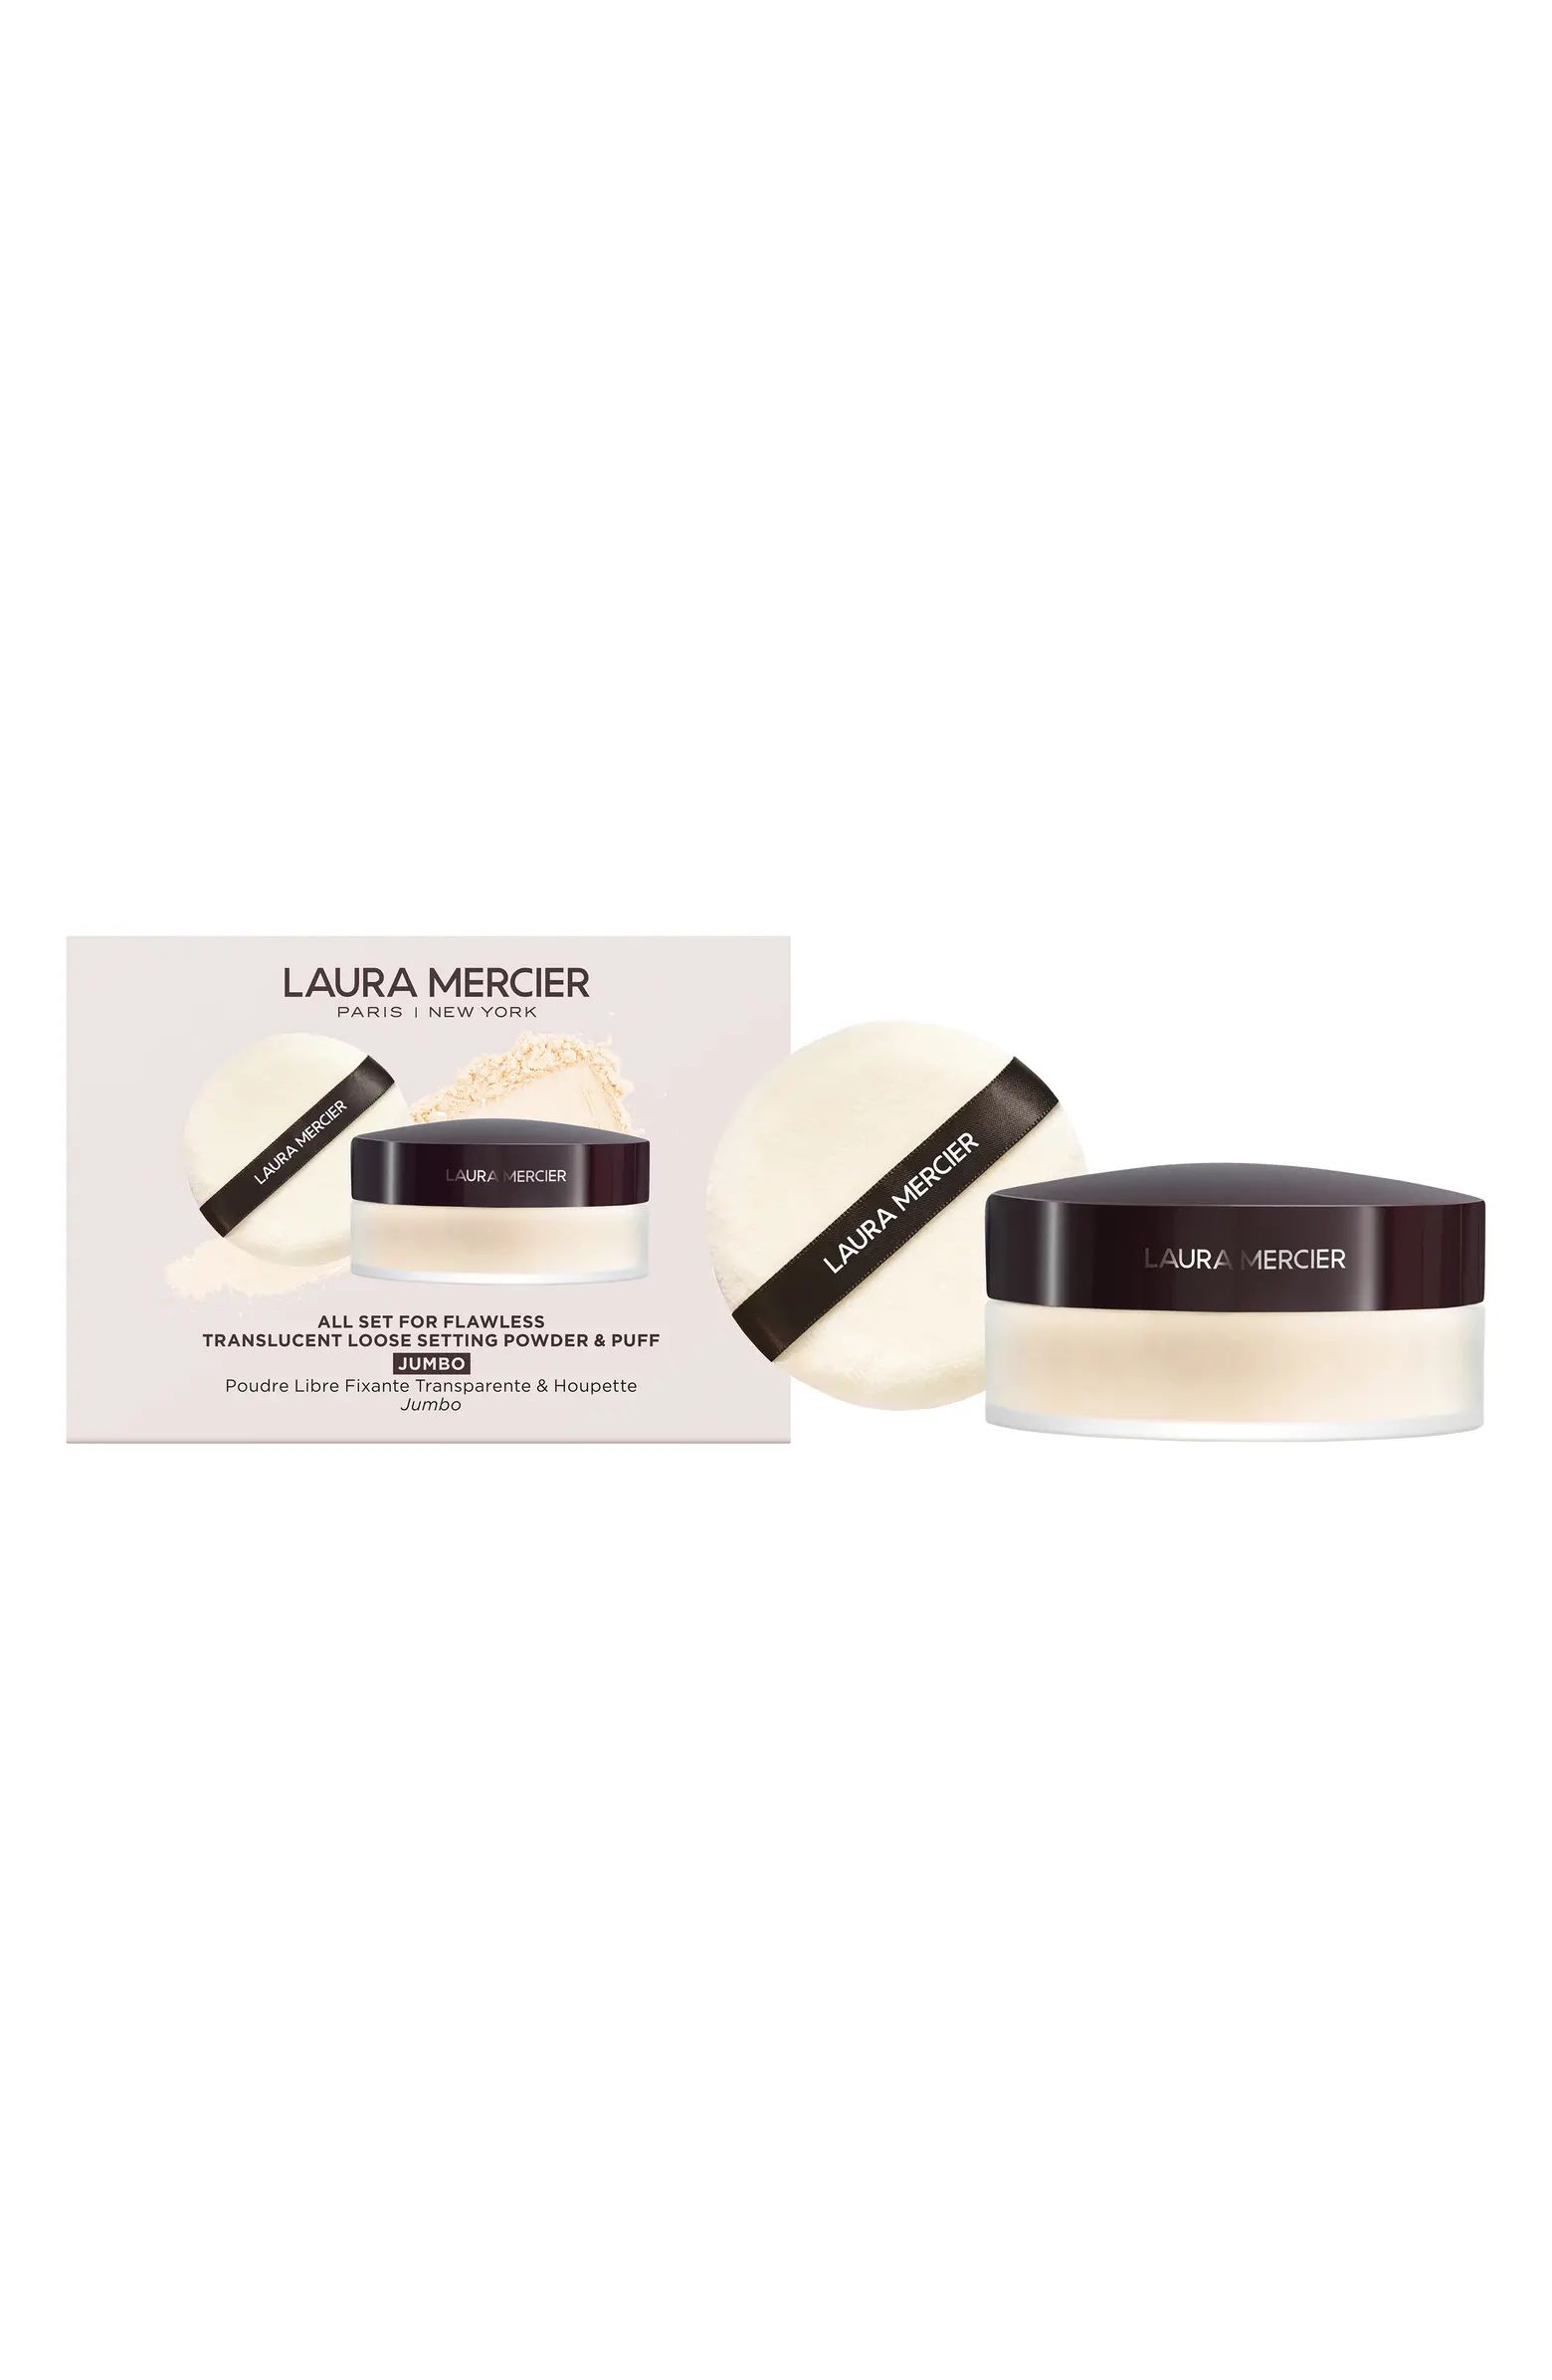 Laura Mercier All Set for Flawless Translucent Loose Setting Powder & Puff $97 Value | Nordstrom | Nordstrom